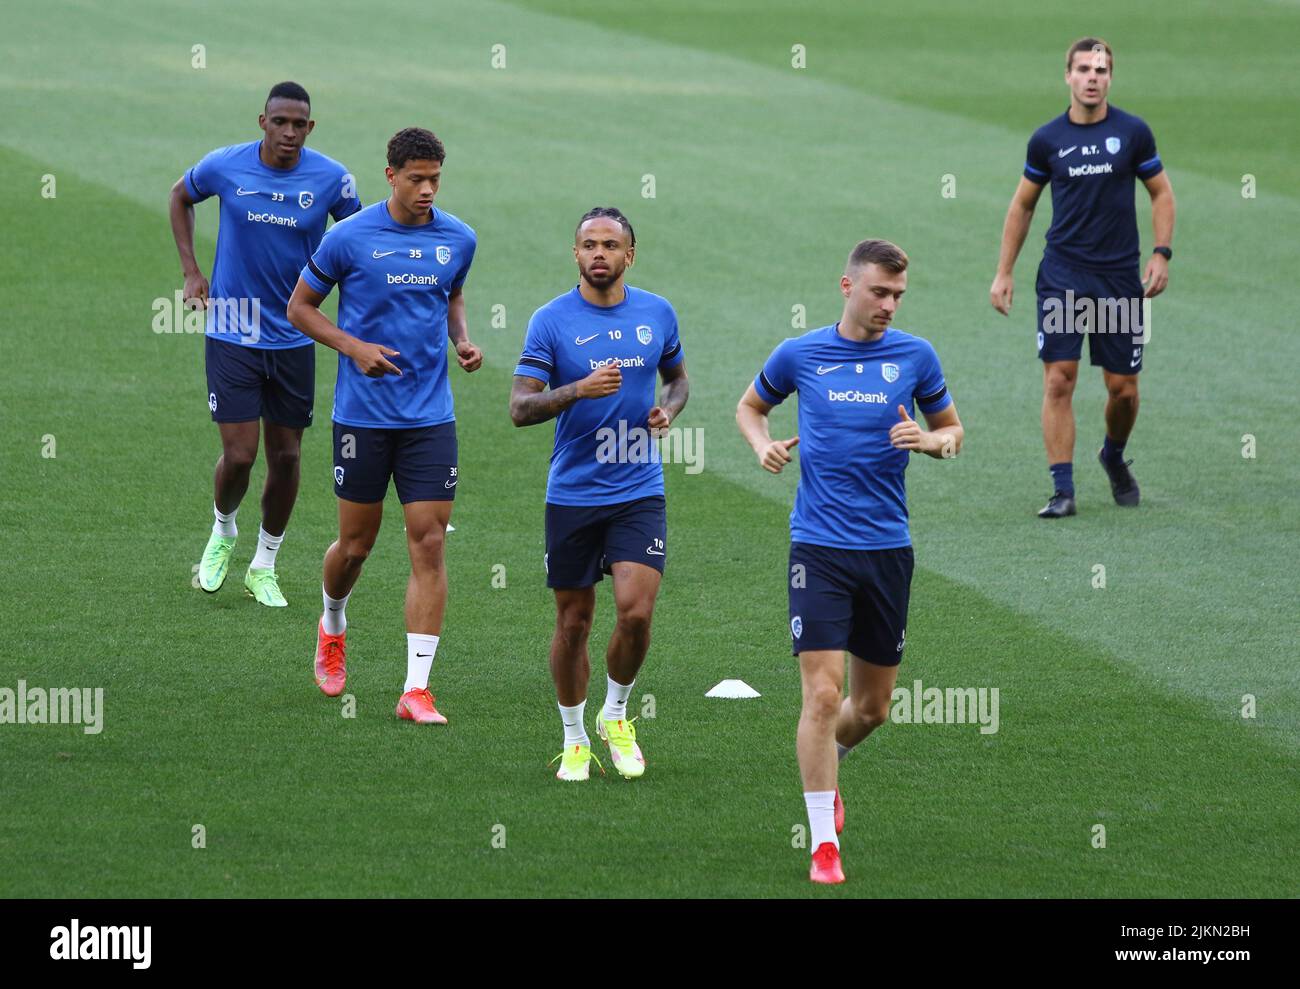 KYIV, UKRAINE - AUGUST 10, 2021: Genk players run during open training session before the UEFA Champions League third qualifying round game against Shakhtar Donetsk in Kyiv Stock Photo